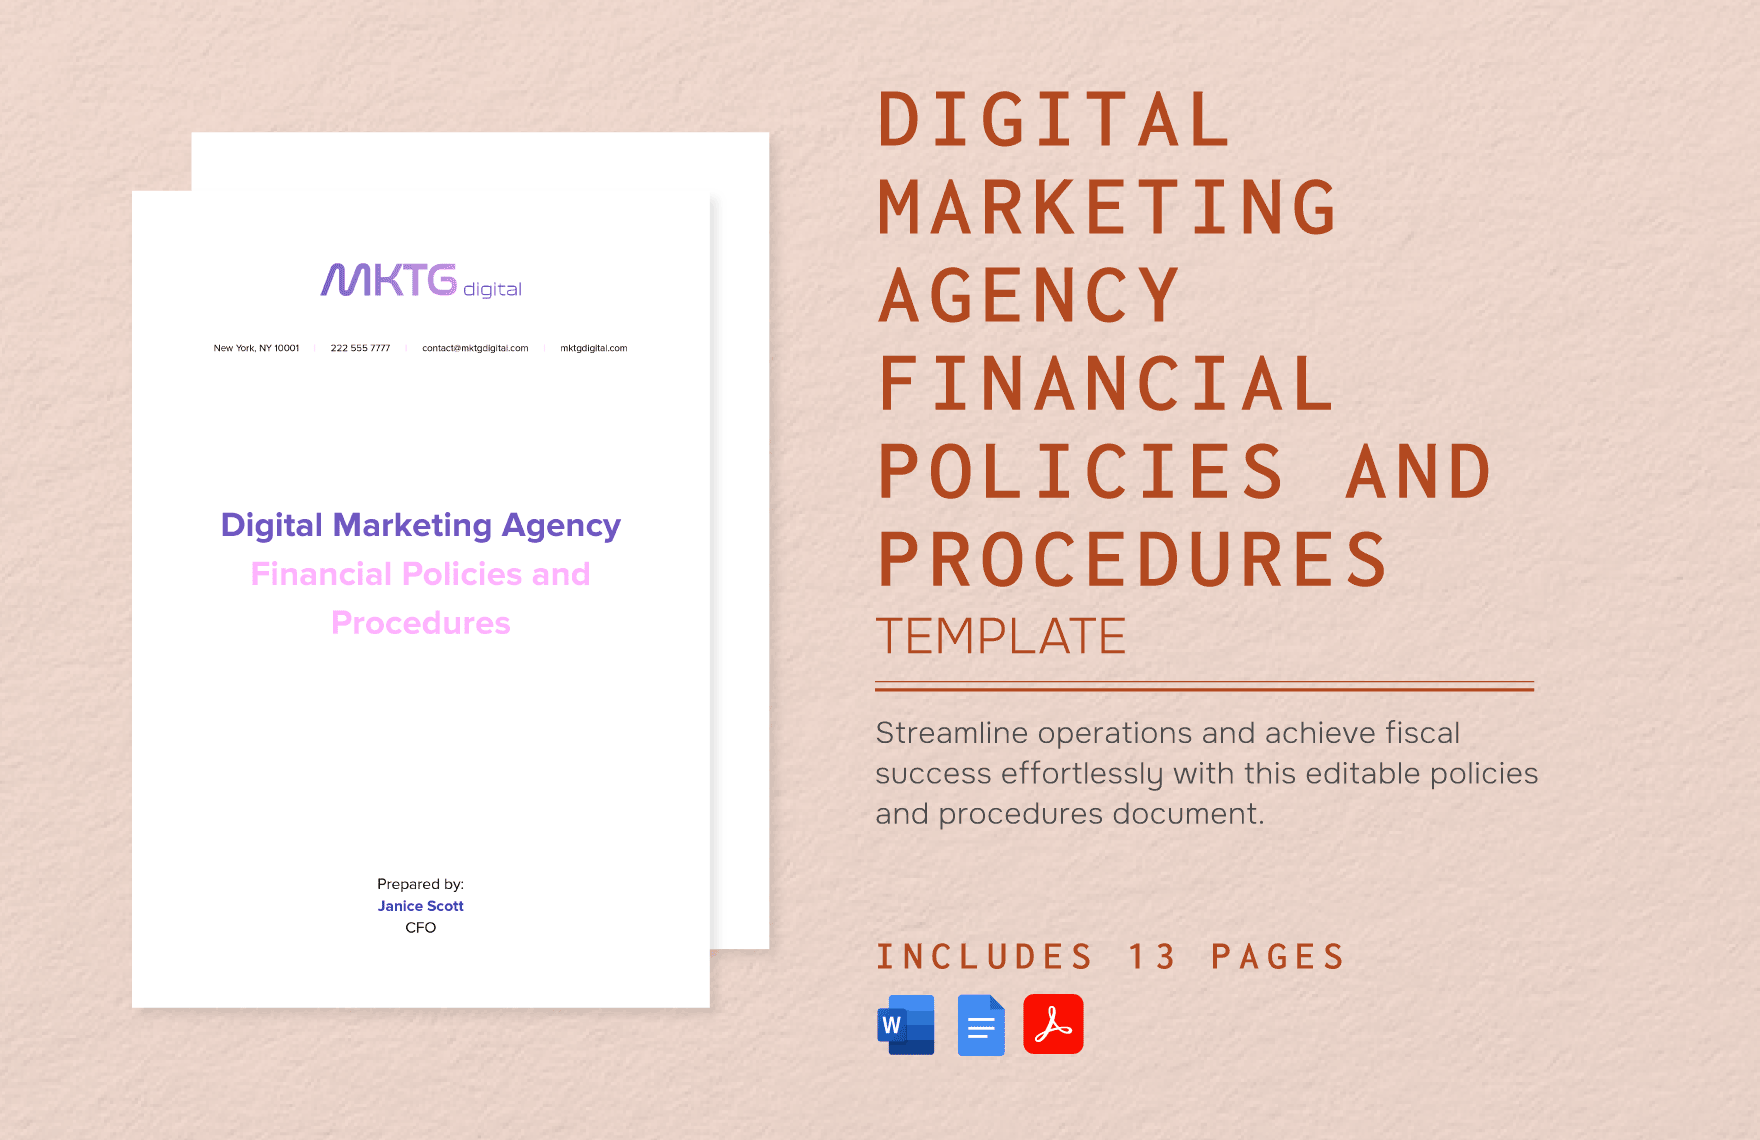 Digital Marketing Agency Financial Policies and Procedures Template